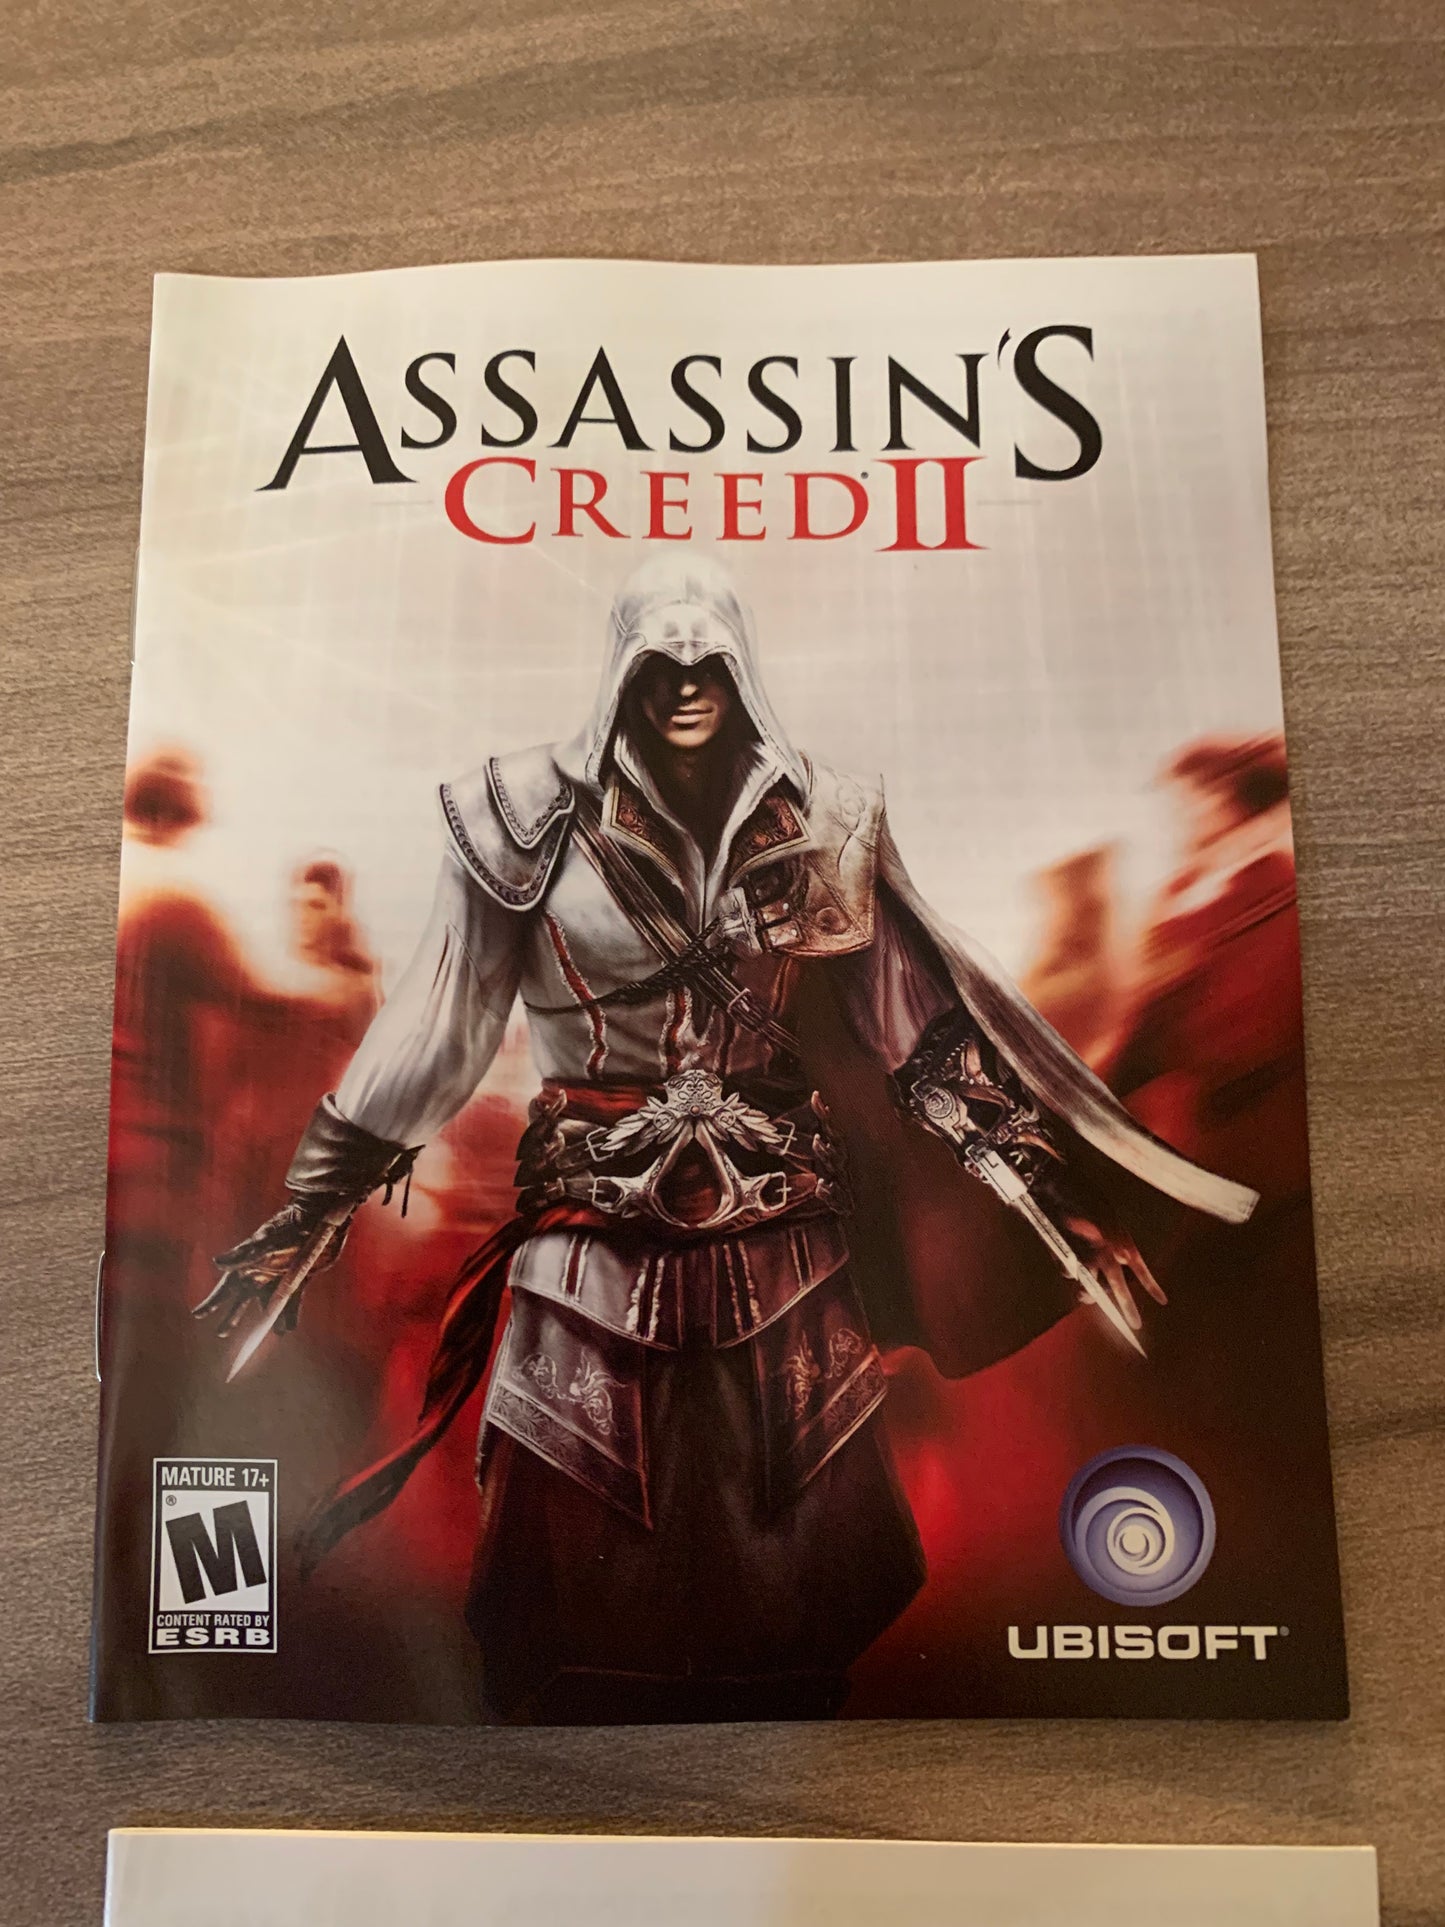 SONY PLAYSTATiON 3 [PS3] | ASSASSiNS CREED II | GREATEST HiTS